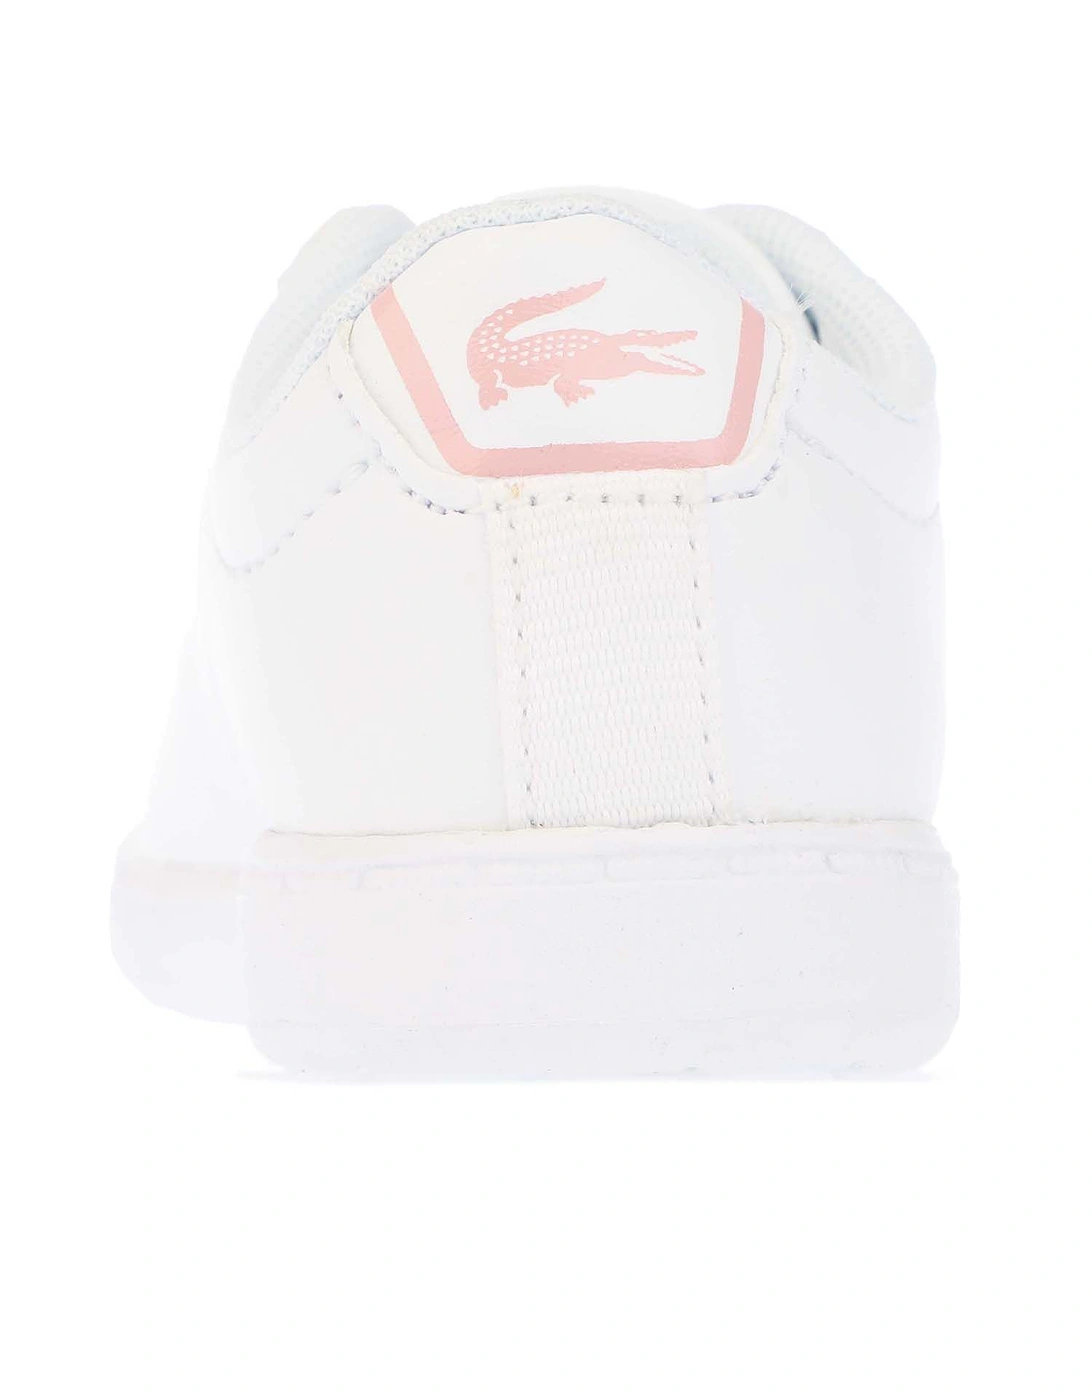 Infant Girls Carnaby Evo Trainers